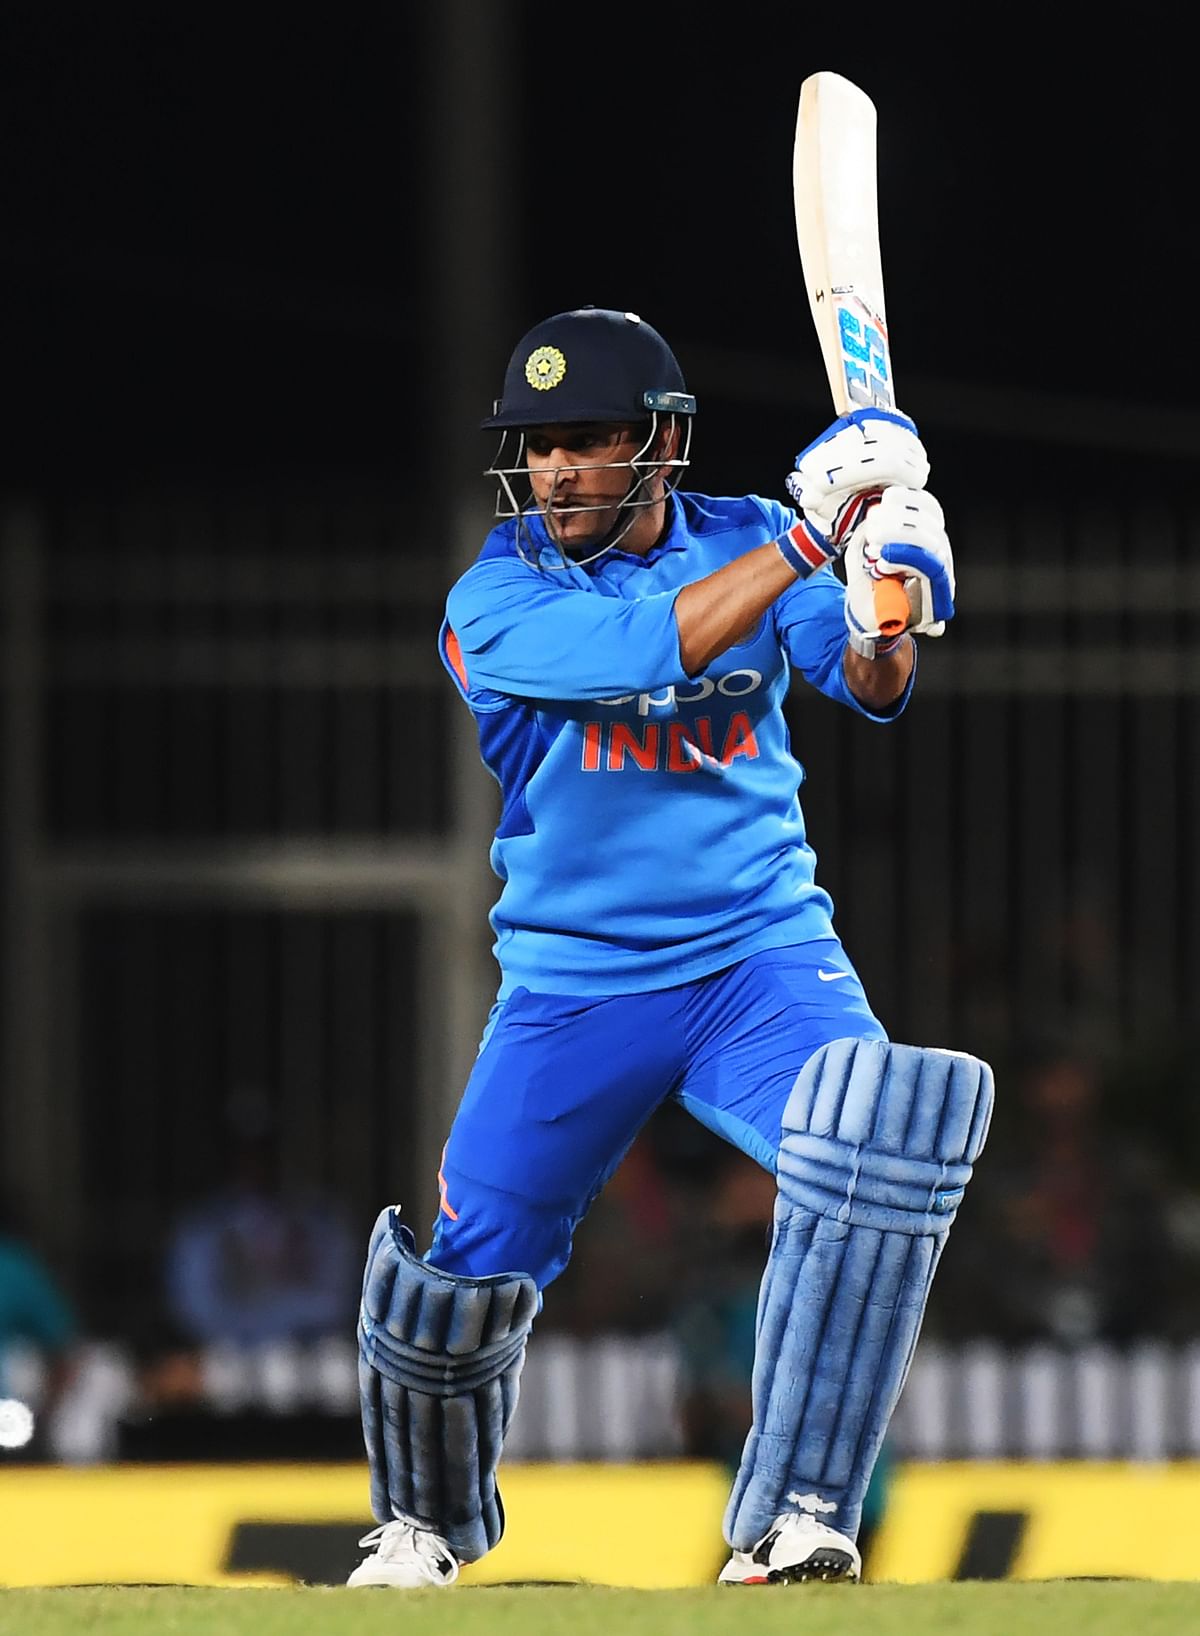 In this file photo taken on 9 March 2019, Indian cricketer Mahendra Singh Dhoni plays a shot during the third one-day international (ODI) cricket match between India and Australia at the Jharkhand State Cricket Association International Cricket Stadium in Ranchi. Photo: AFP